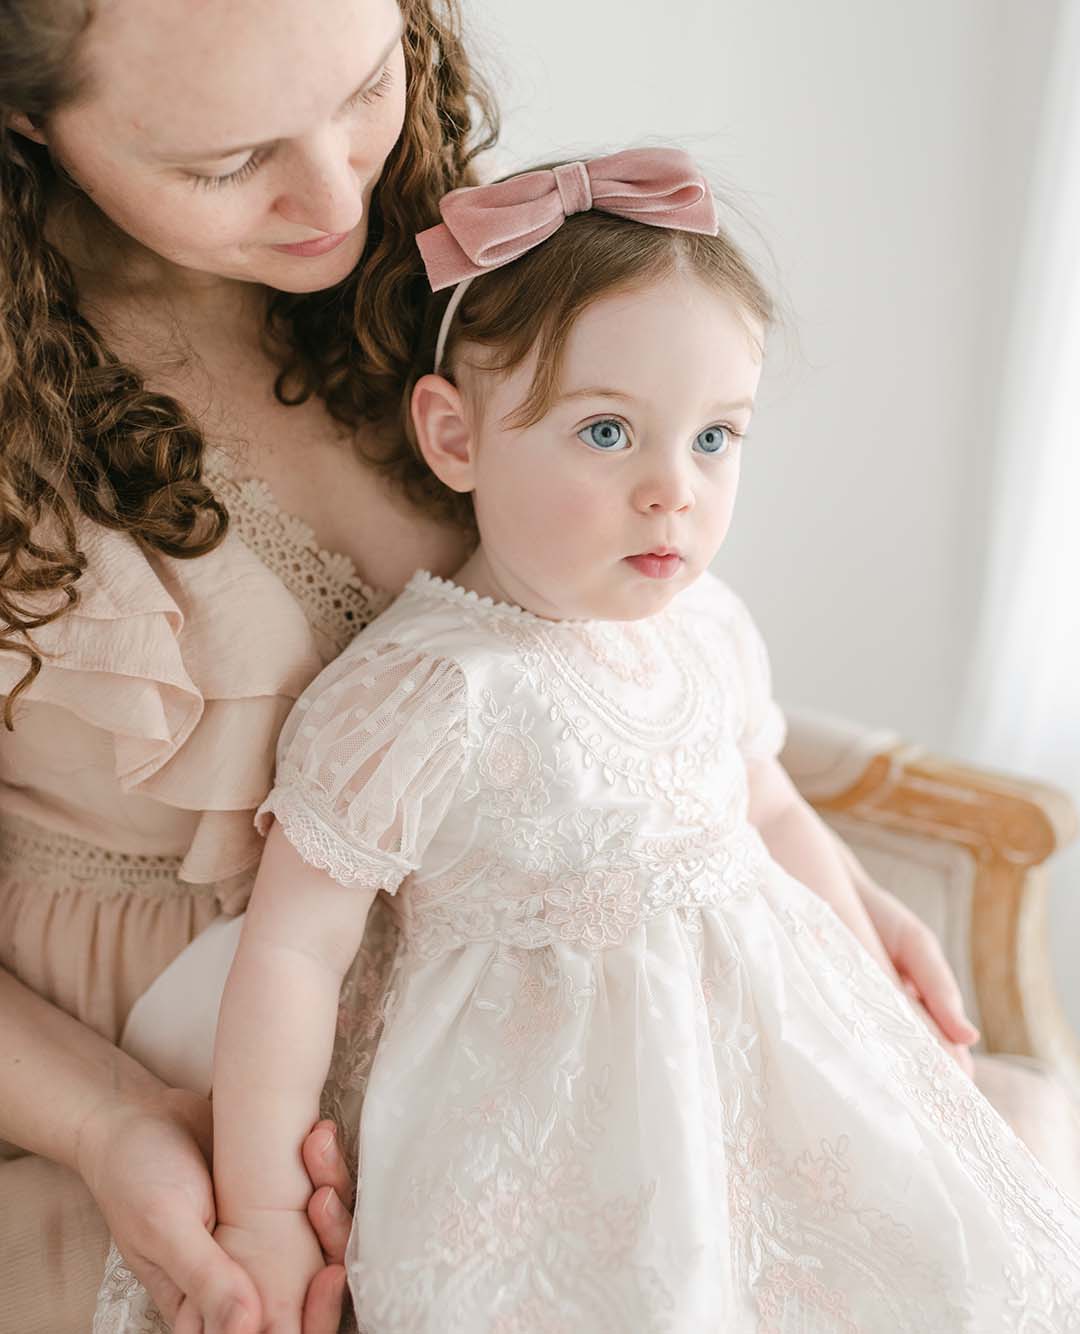 A mother gently holds her toddler, dressed in the Elizabeth Christening Dress with lace details for a christening. The child looks surprised as they sit by a window with soft natural light.